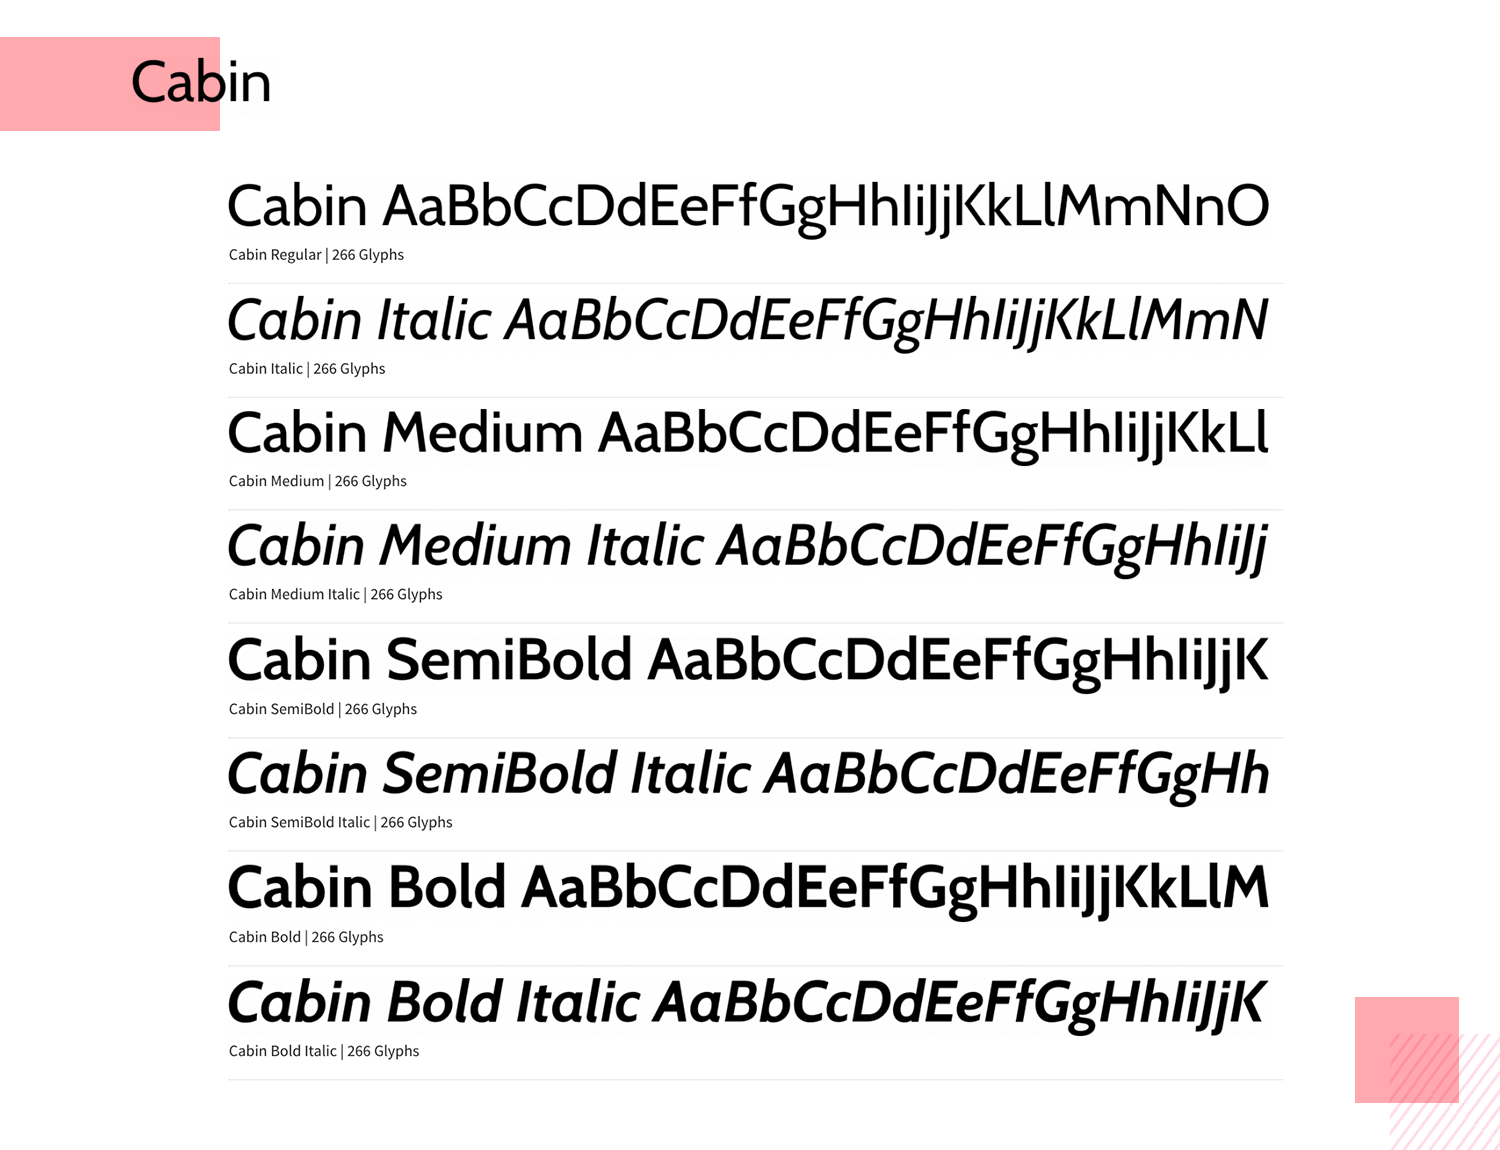 Cabin font variations in bold, italic, regular, and book styles